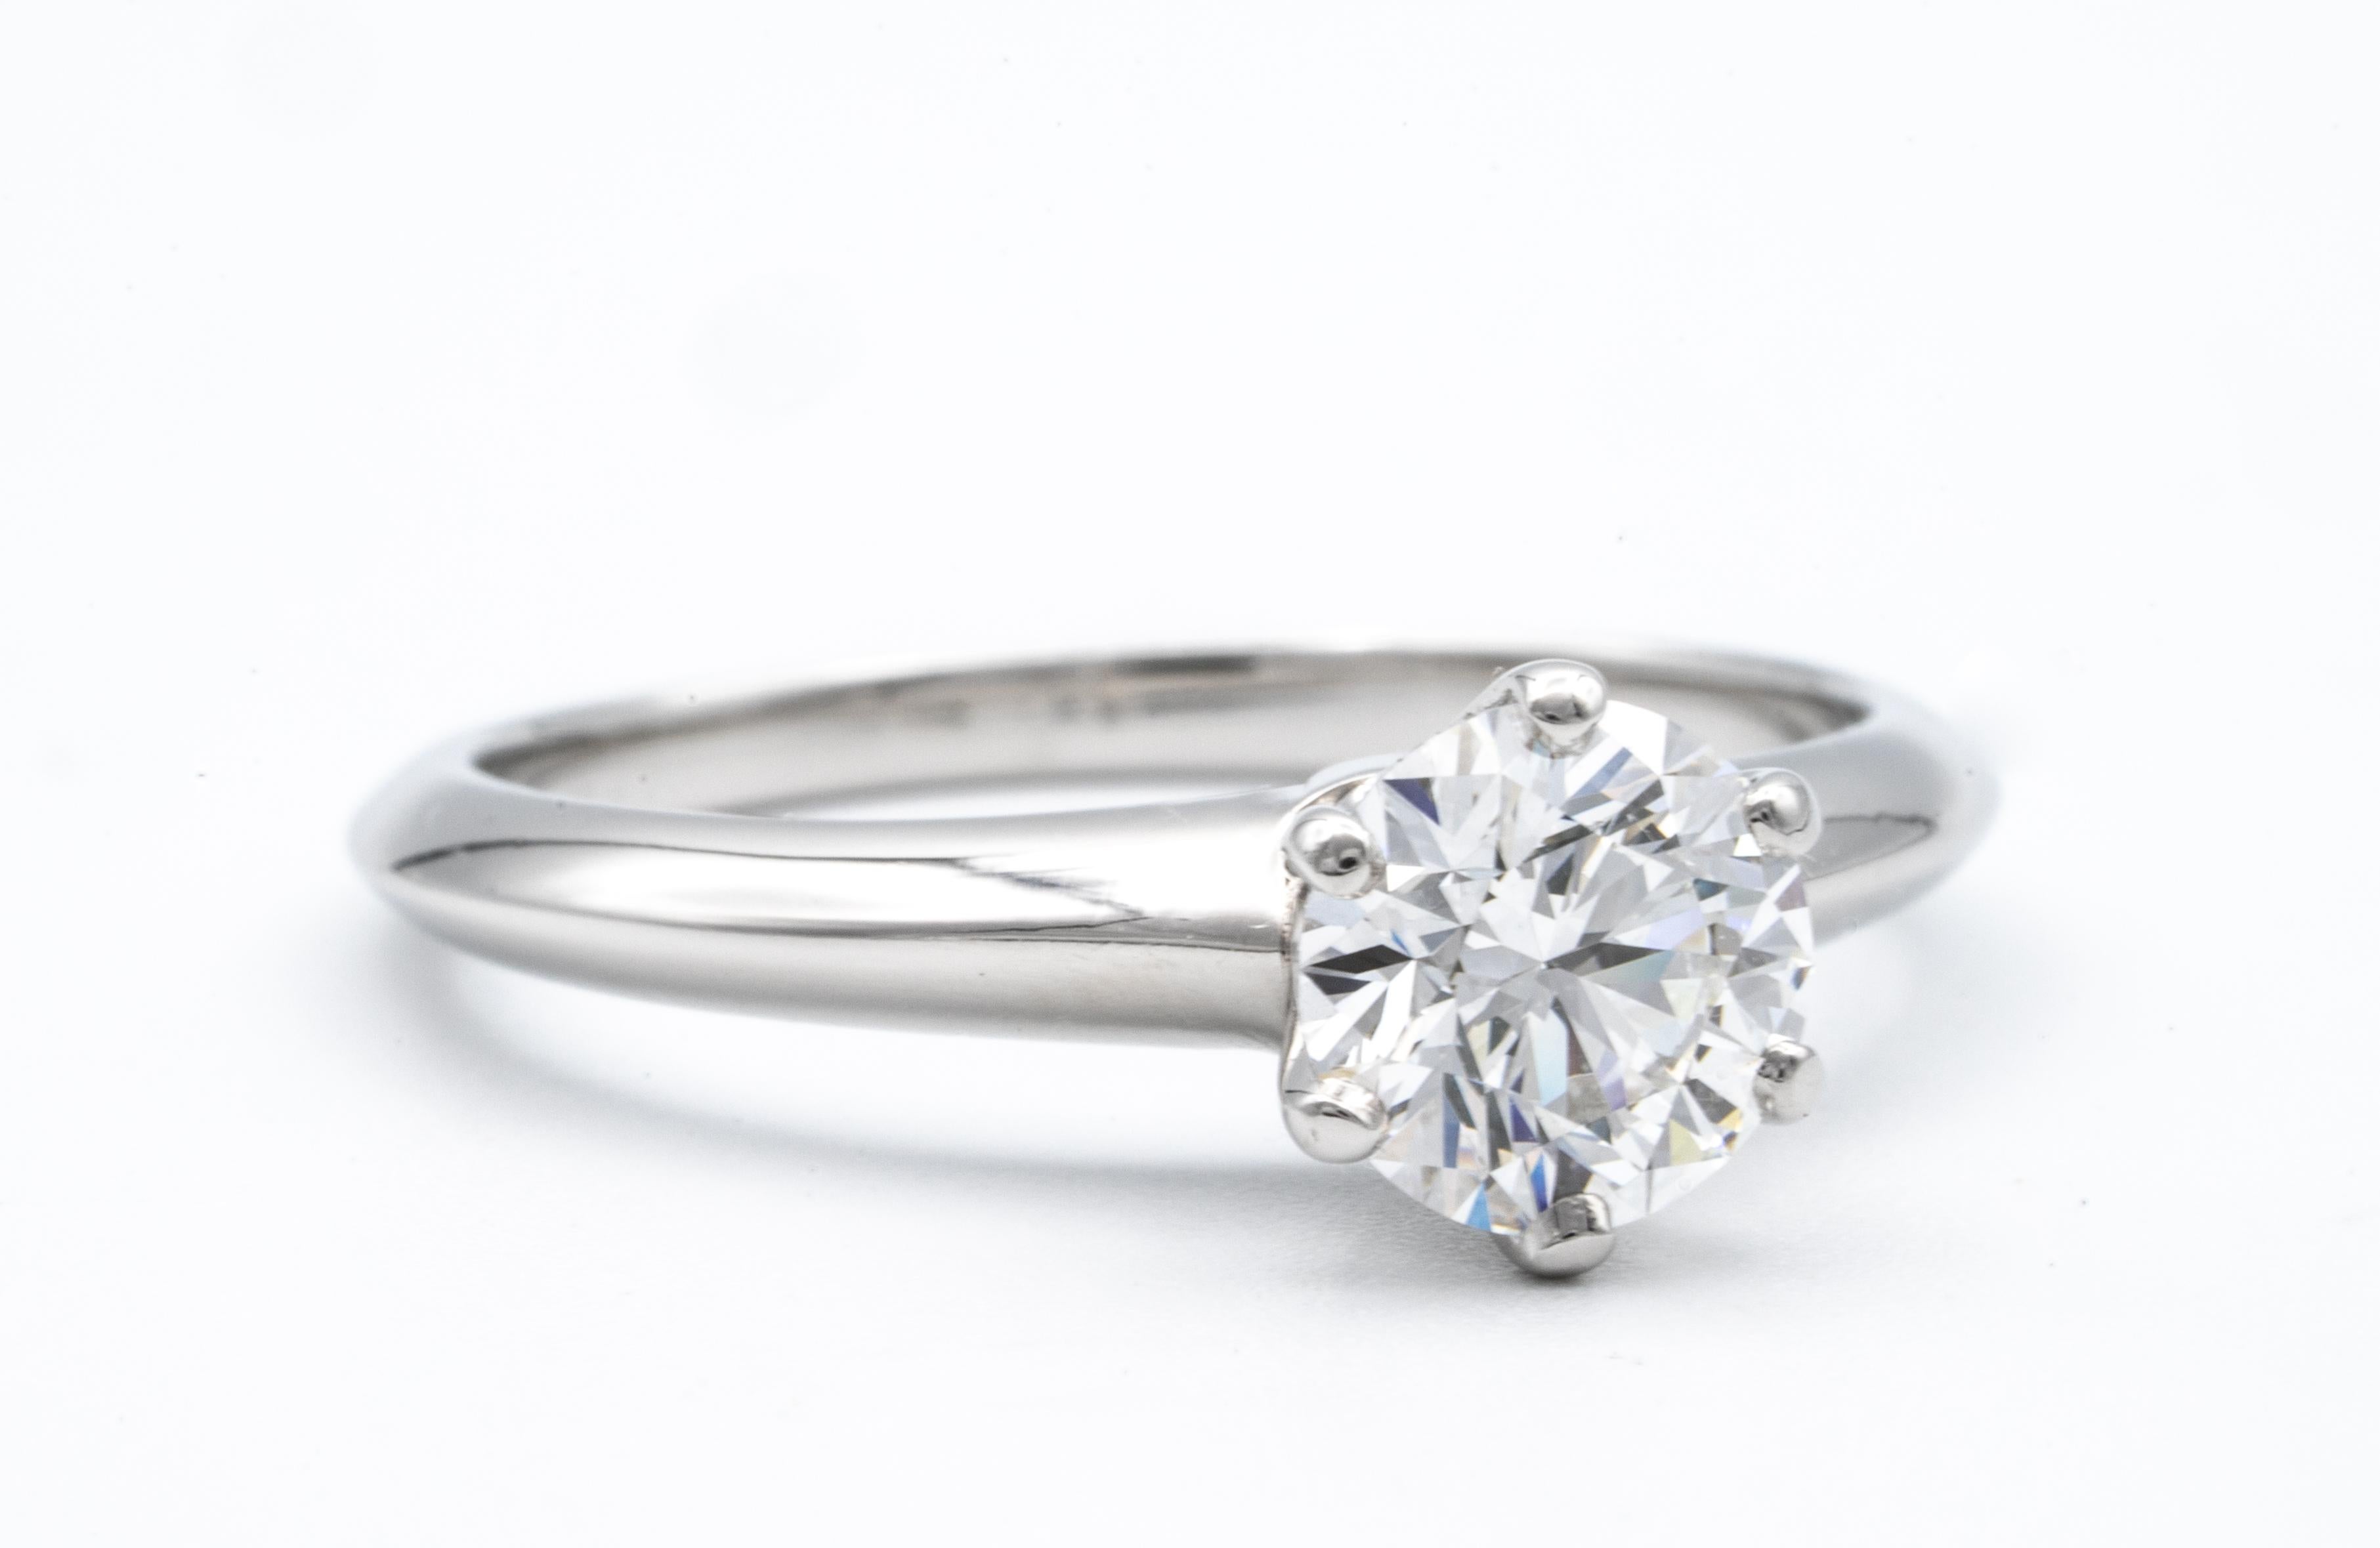 Tiffany & Co. Diamond Engagement Solitaire signed by Tiffany & Co. featuring a .92 ct Center, graded F color , and VS1 Clarity.
In Platinum

Crown Inscription: T&Co. 19263363
Includes Original Tiffany Certificate and Box
Current Retail from Tiffany